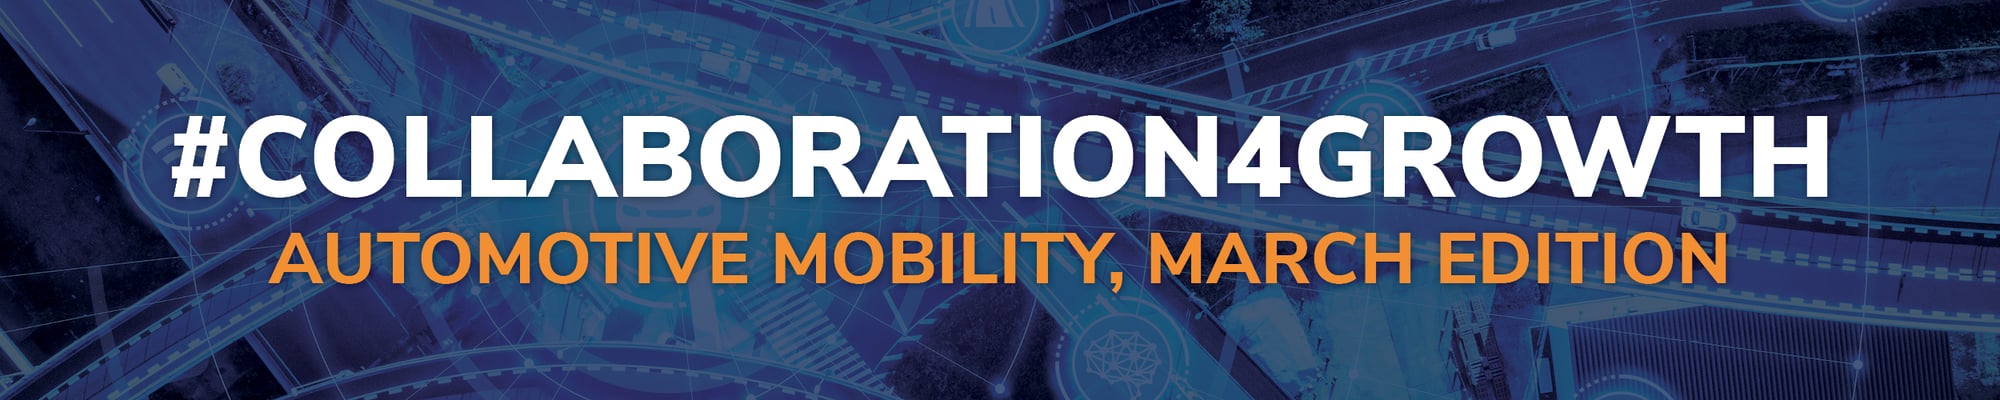 Collaboration4Growth Automotive Mobility, March Edition